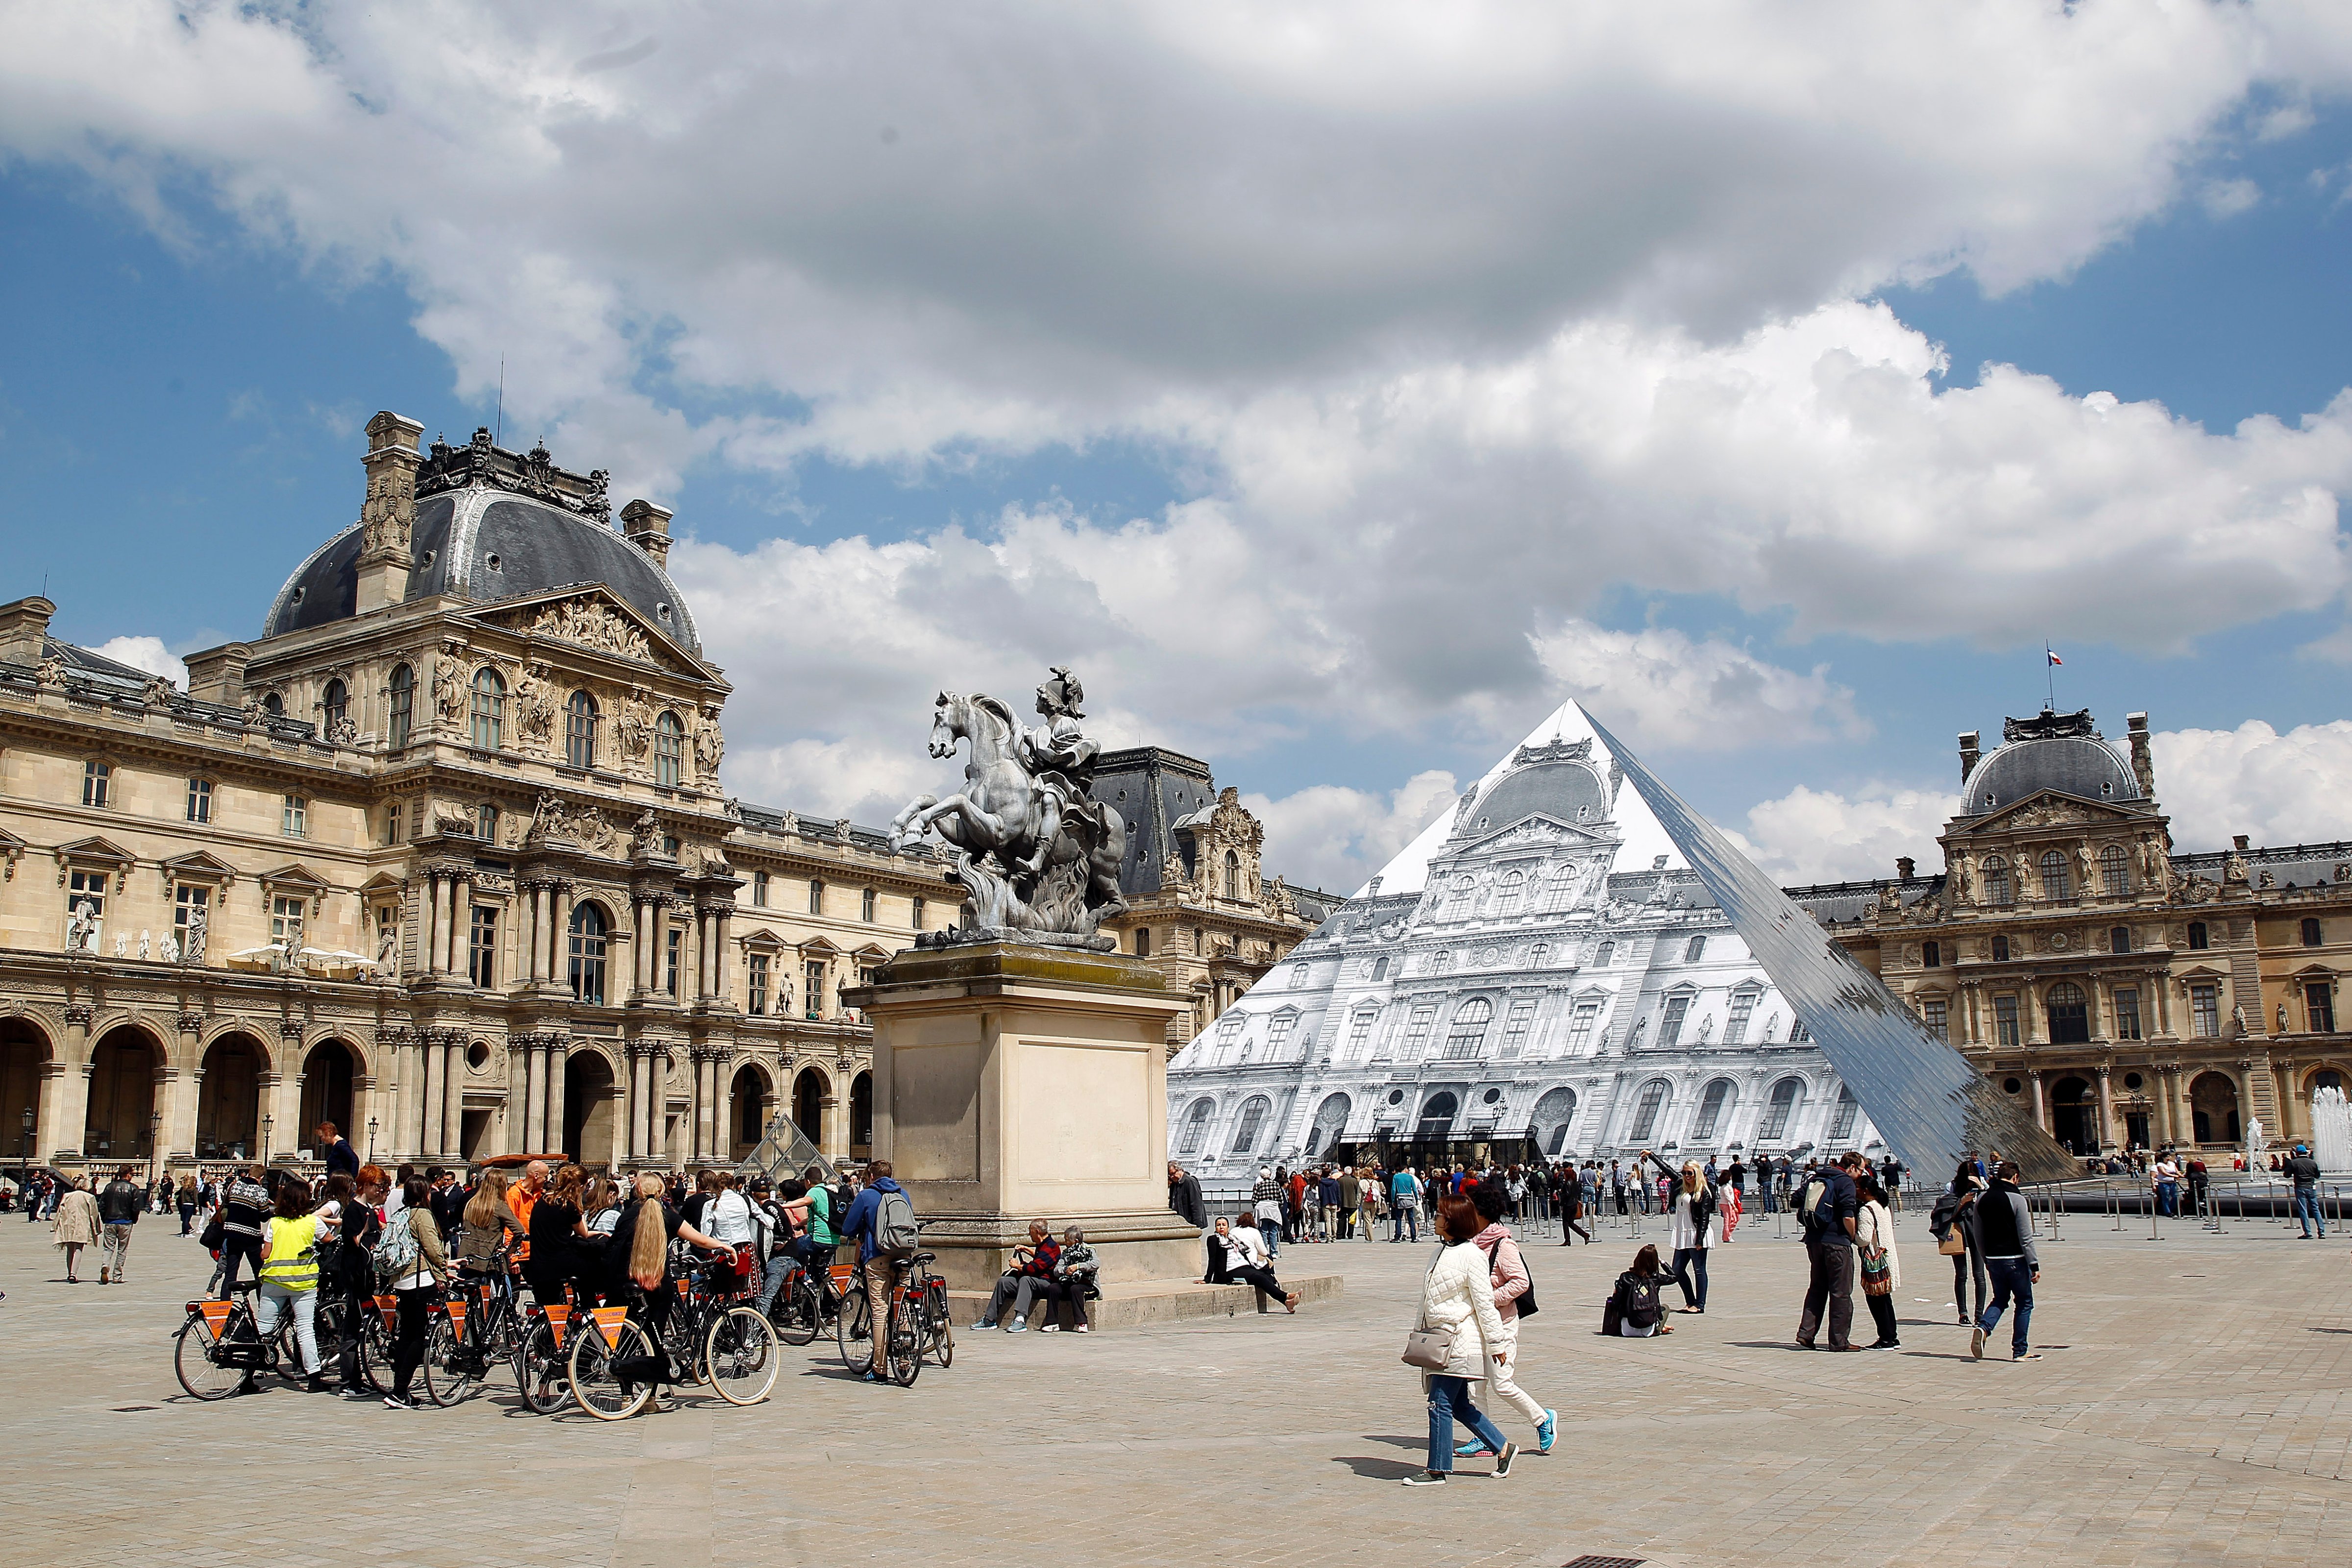 French Street Artist JR Inaugurates his New Public Artwork At The Louvre Museum In Paris